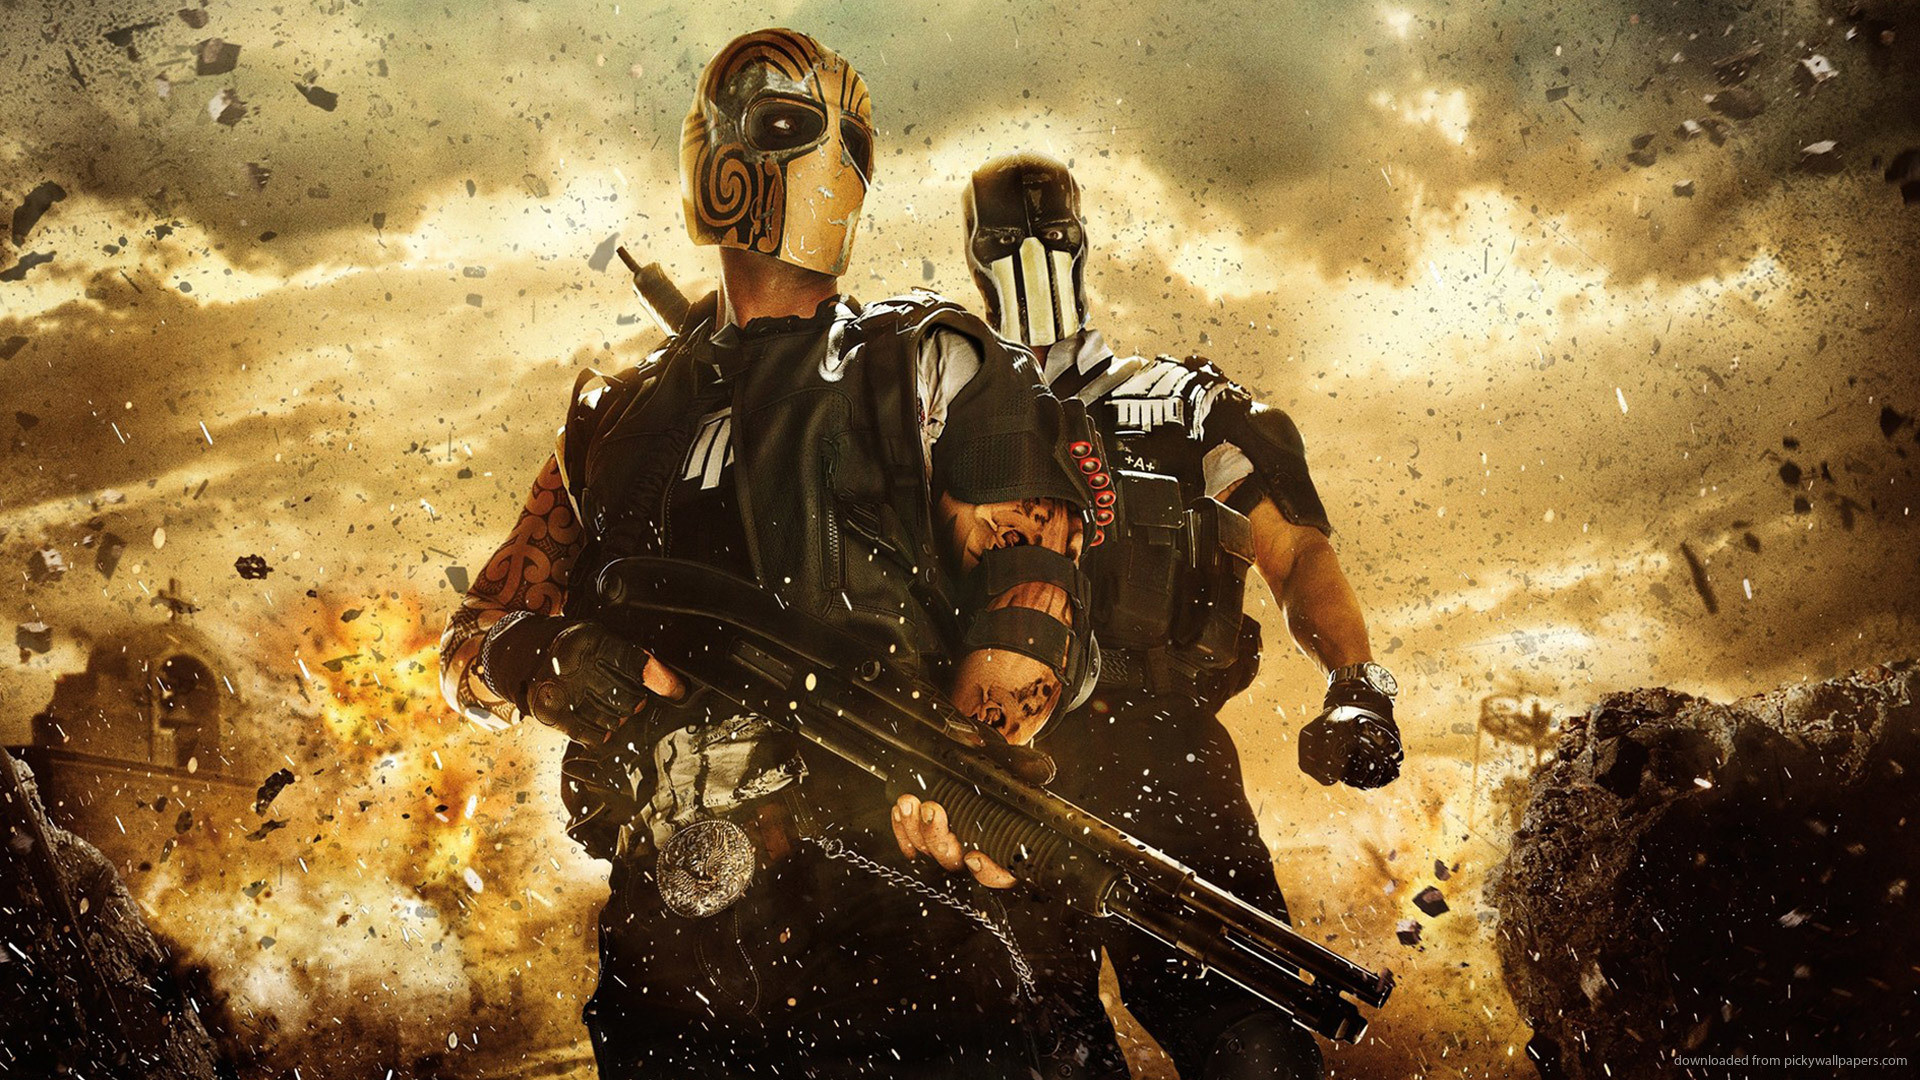 1920x1080 Army Of Two Video Game Wallpaper picture